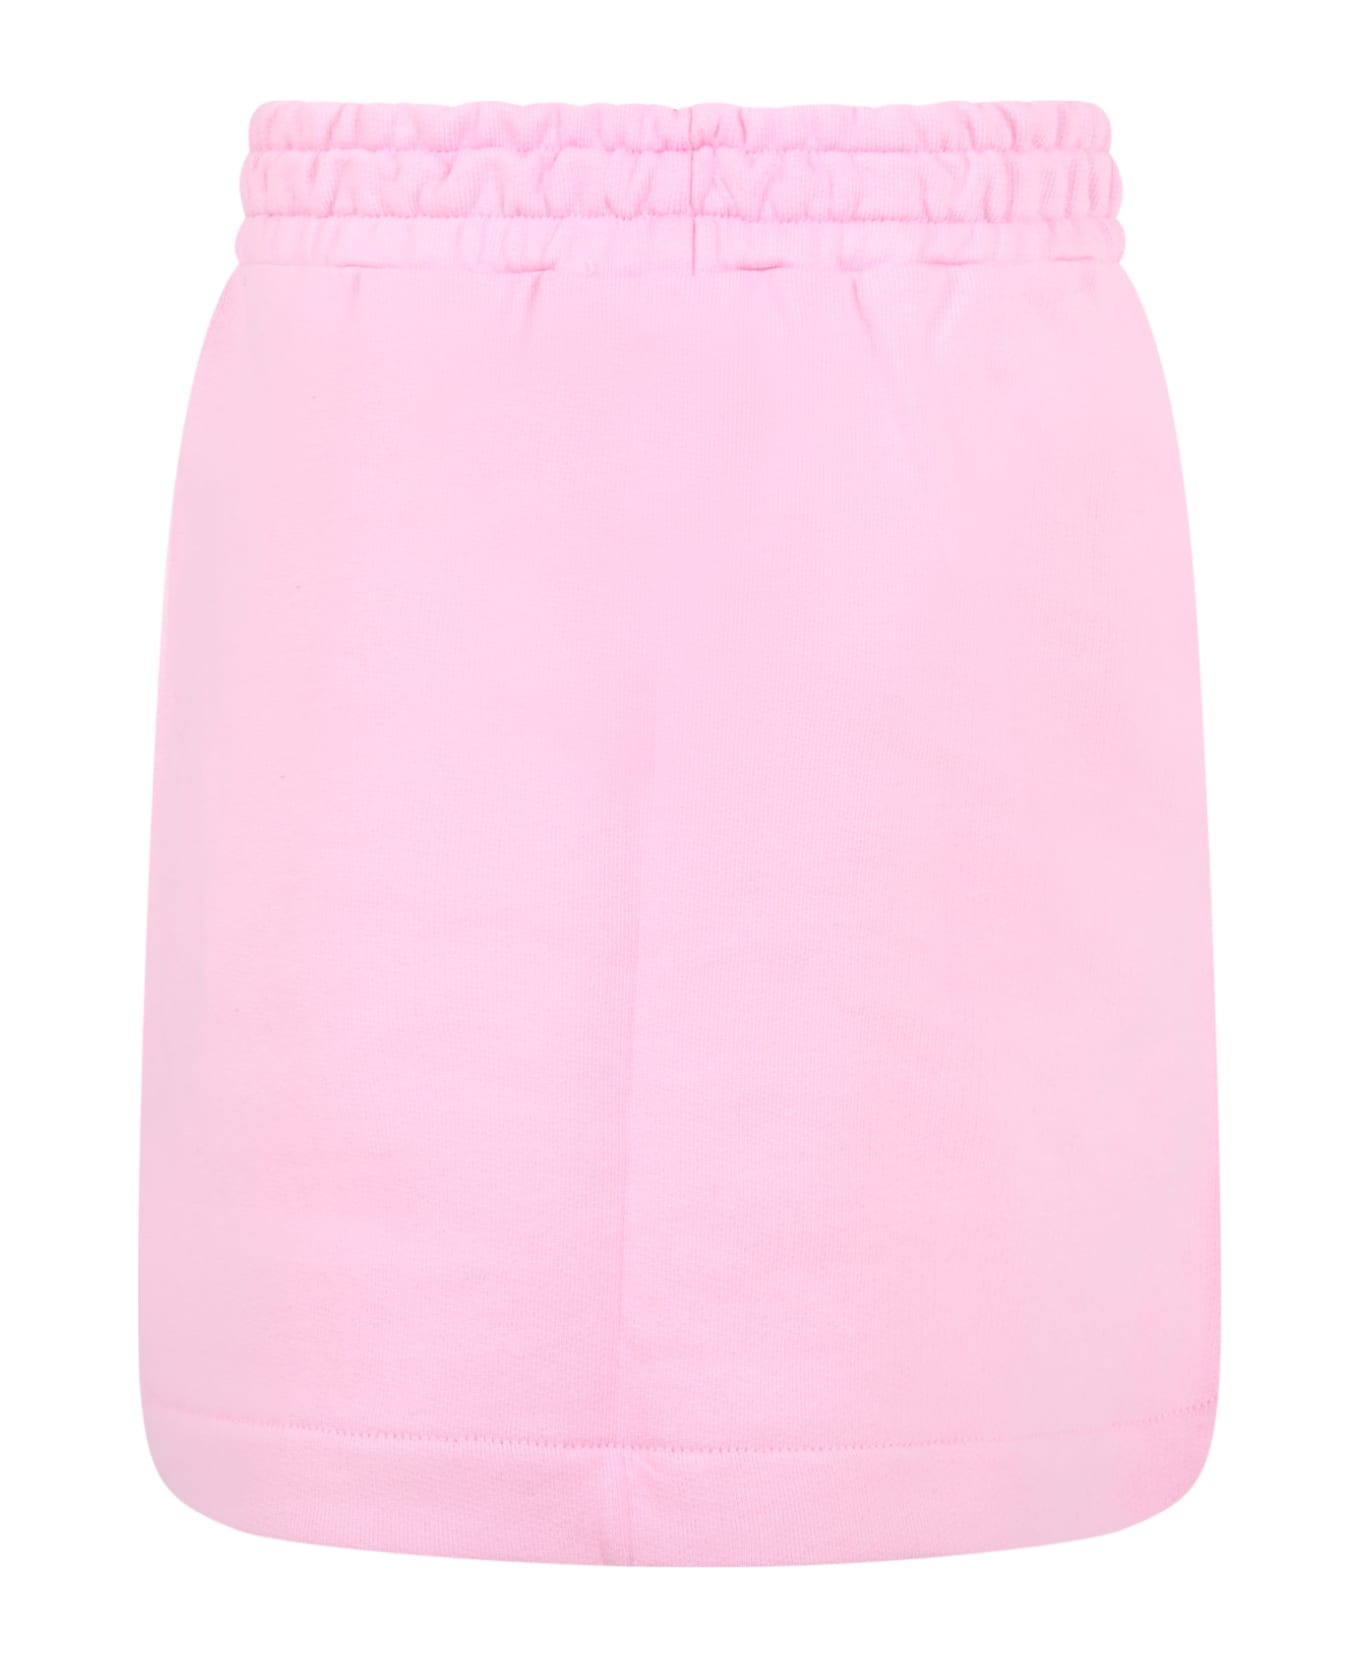 MSGM Pink Skirt For Girl With Red Logo - Pink